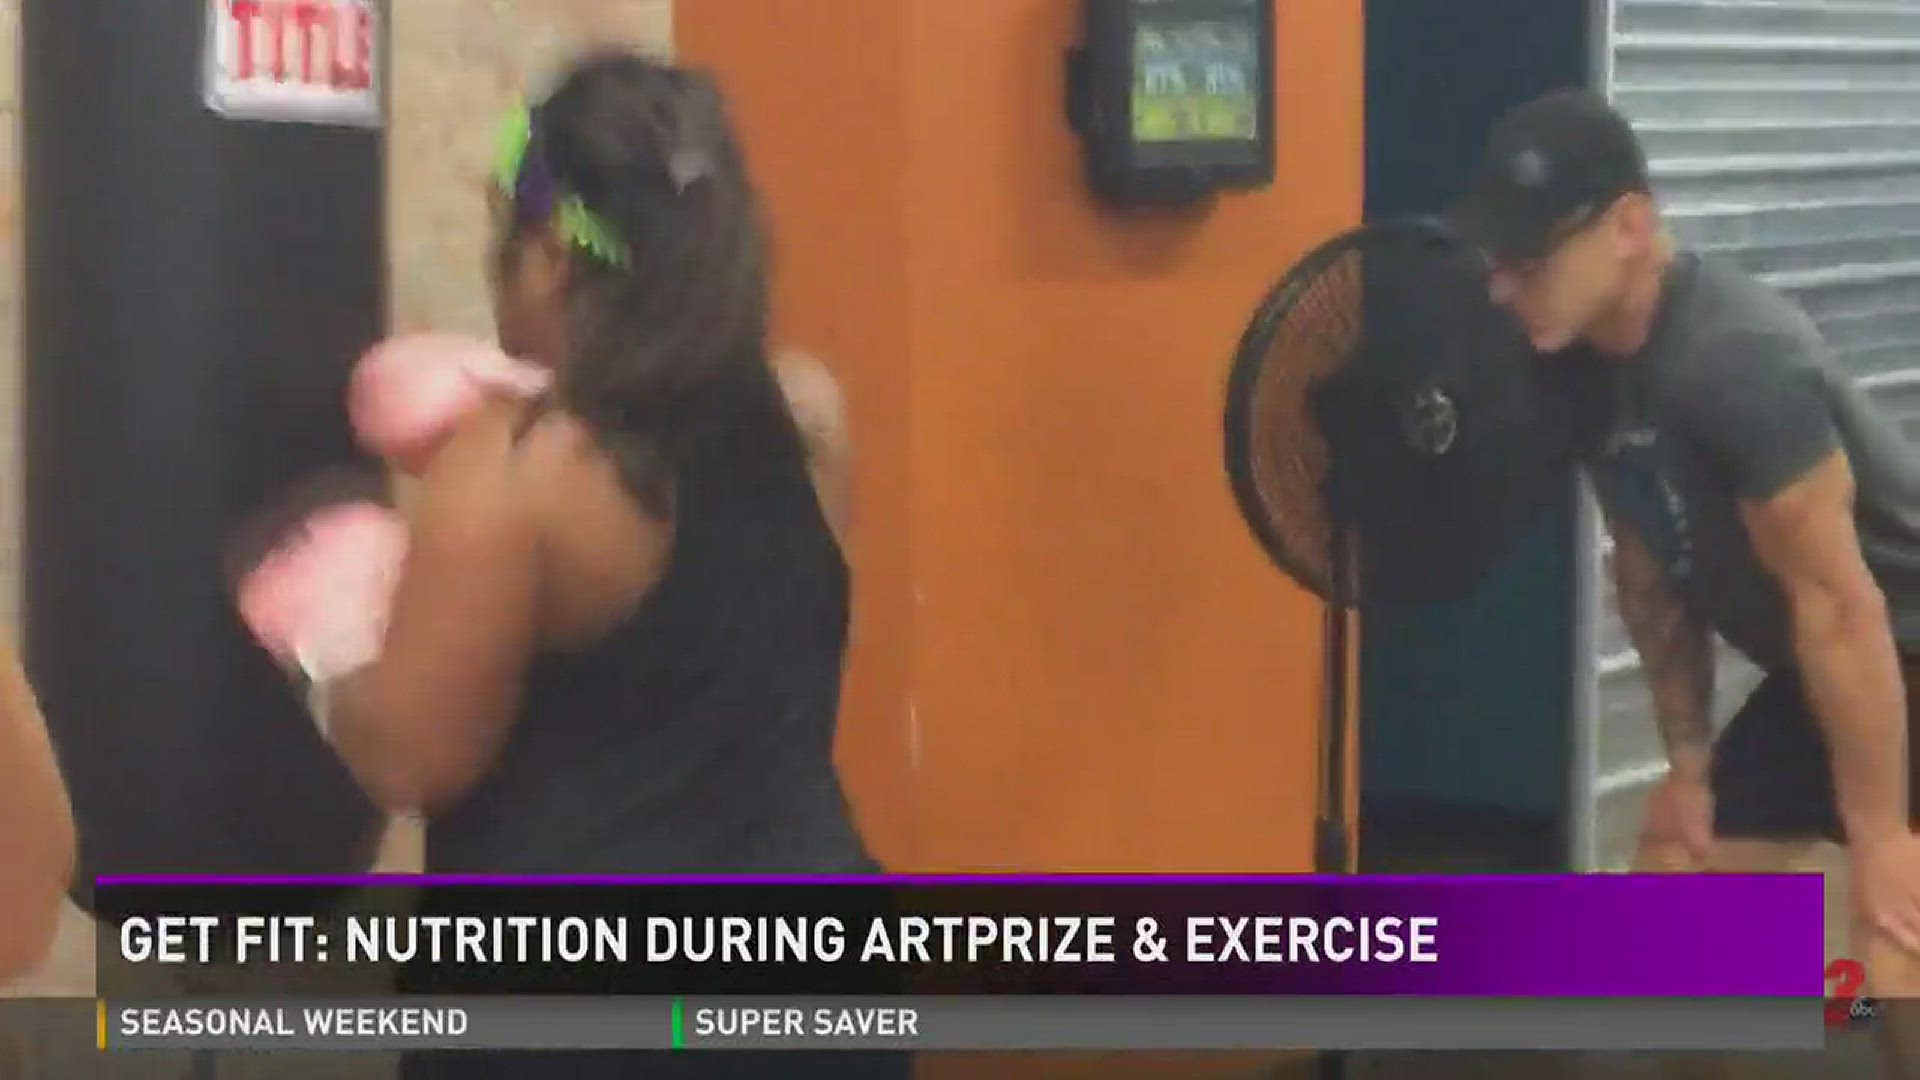 Get Fit: Nutrition & exercise during ArtPrize